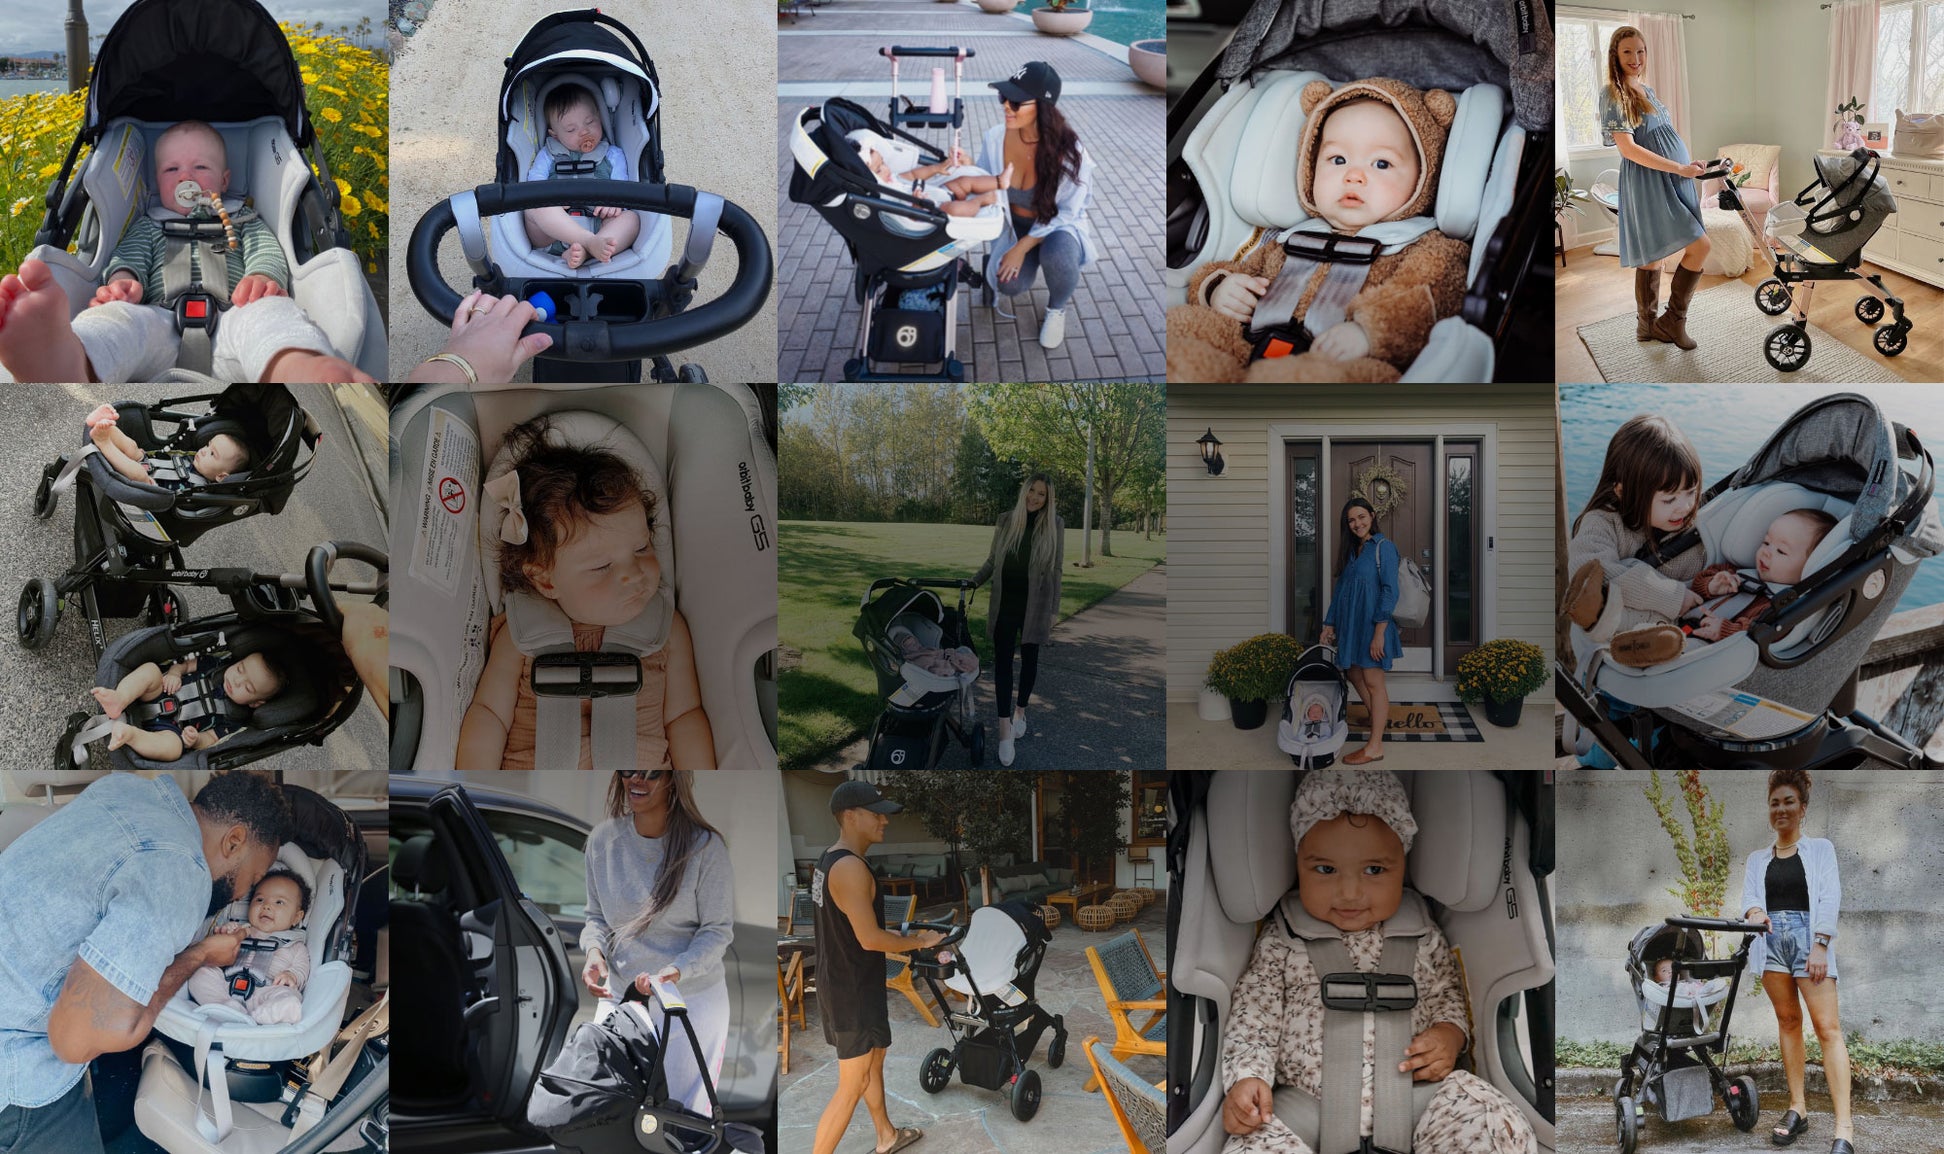 orbit baby stroller images from their website